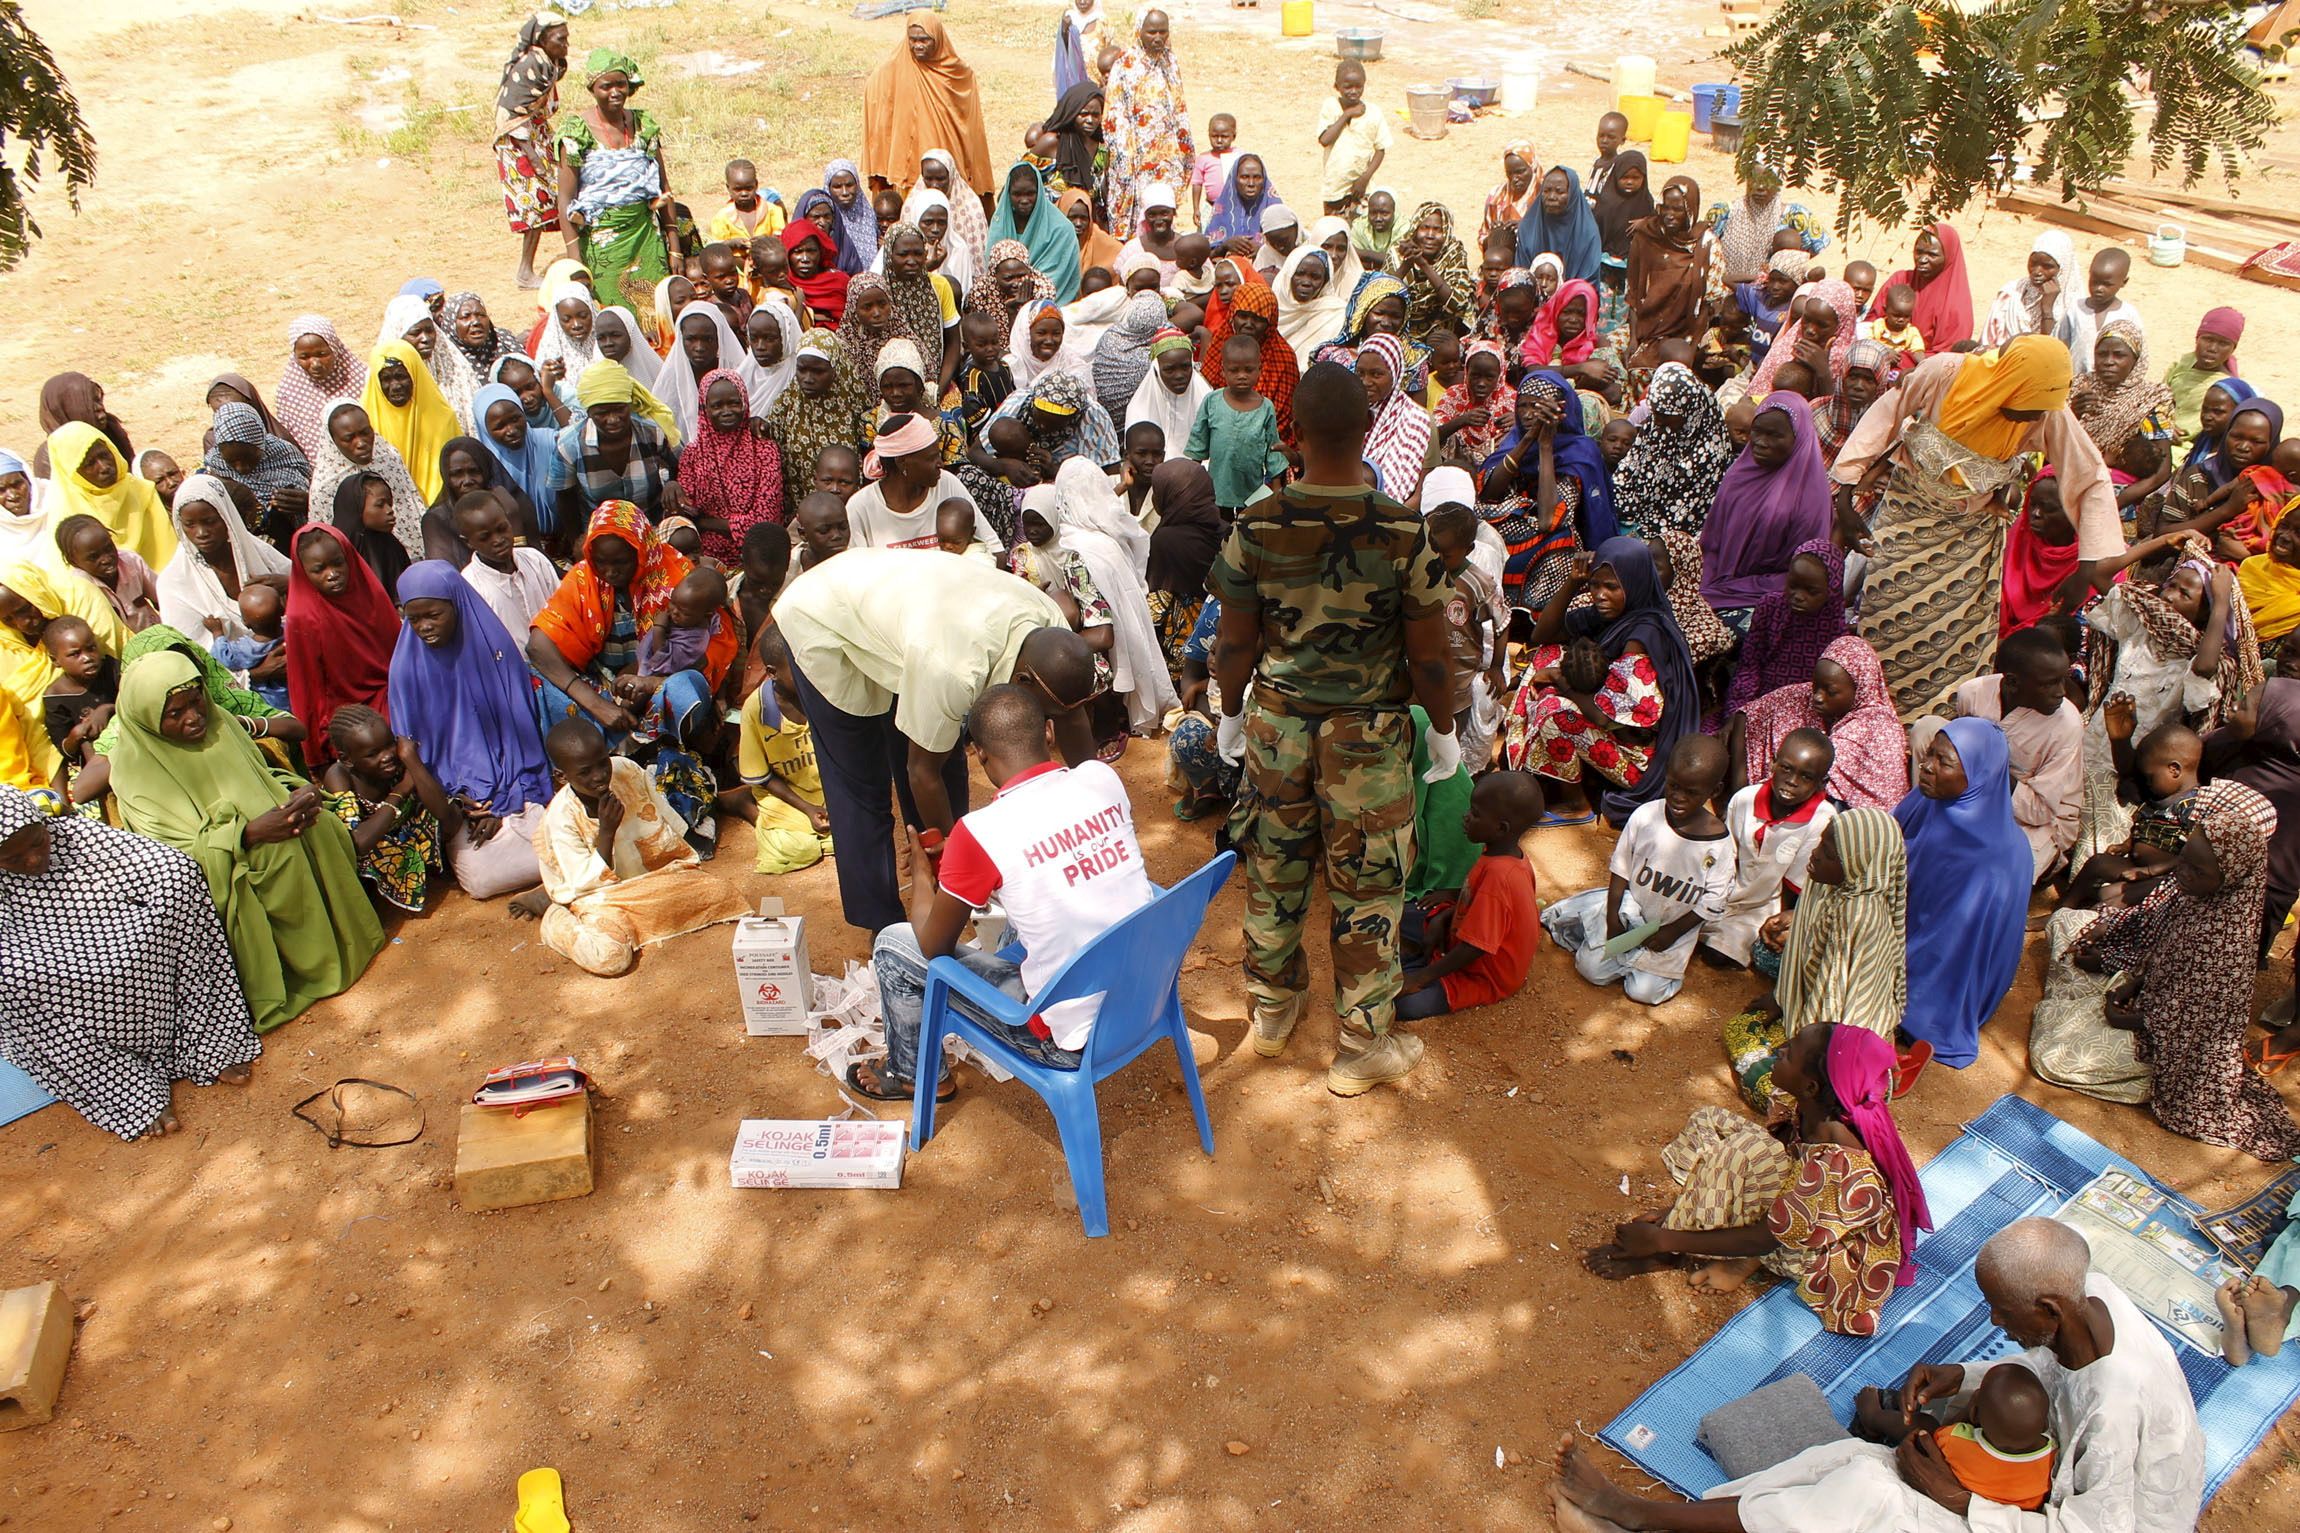 People rescued after being held captive by Boko Haram near its Sambisa Forest wait for medical treatment.